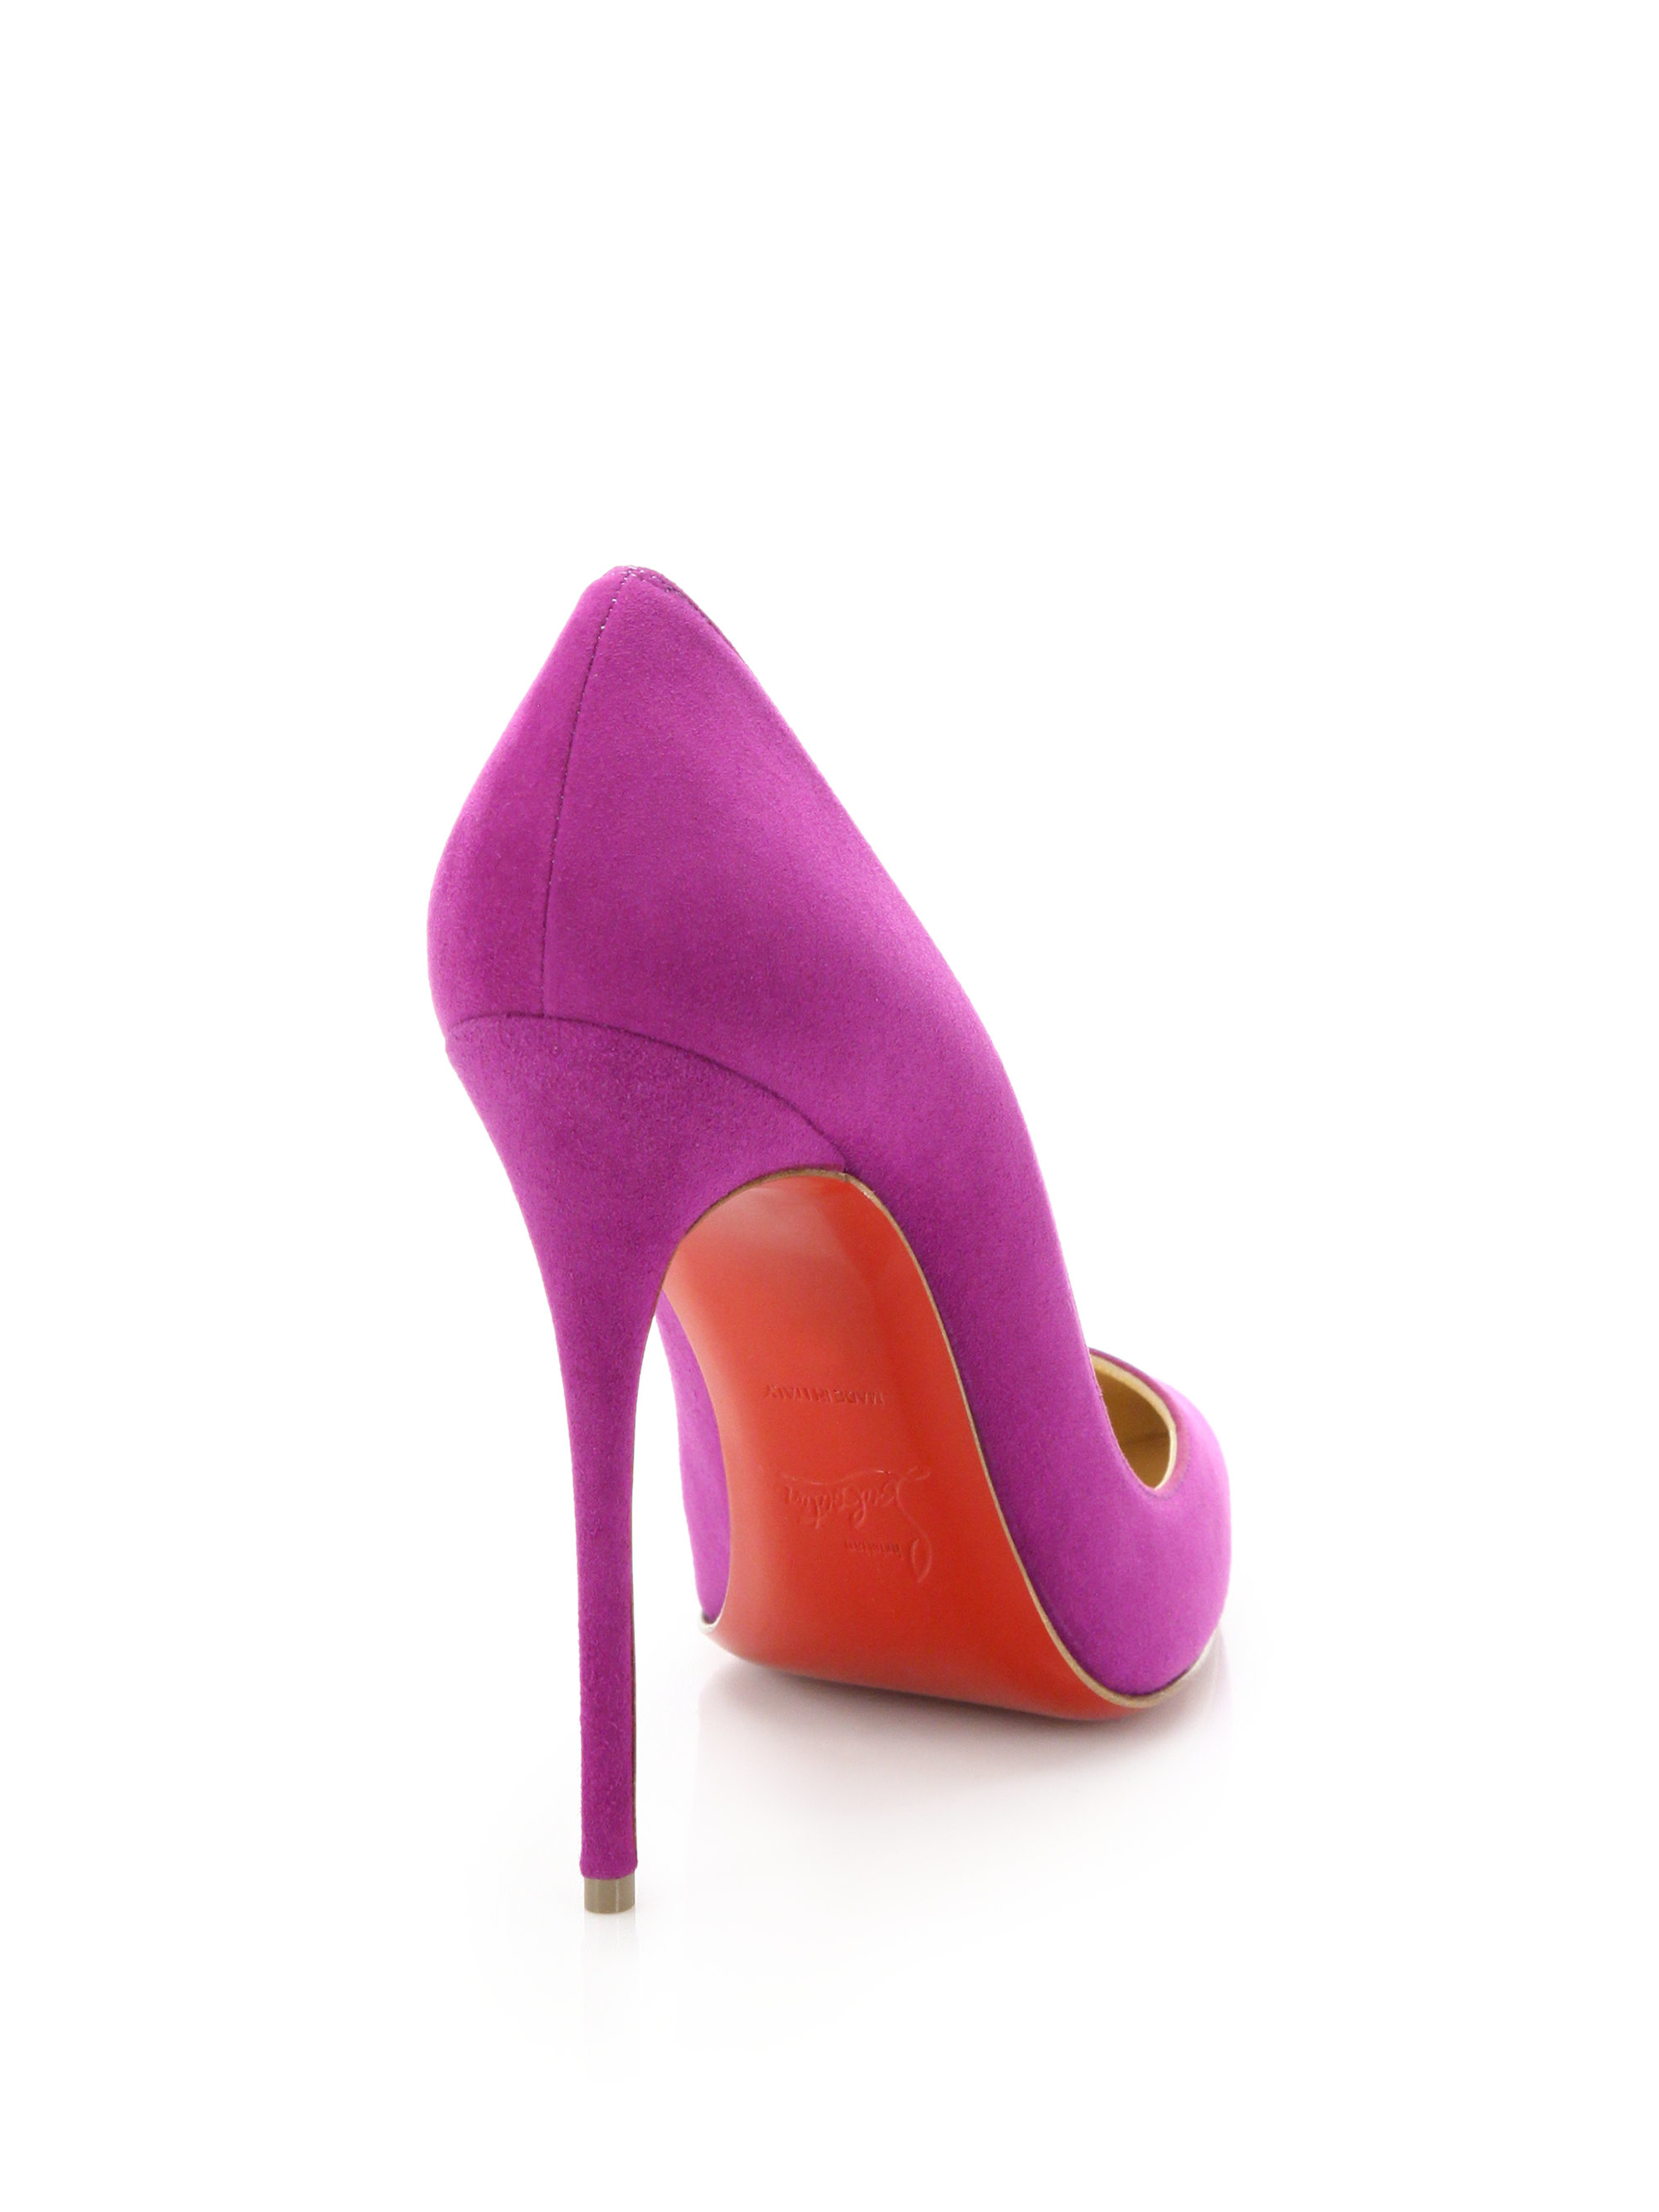 Christian louboutin So Kate Suede Pumps in Pink | Lyst  